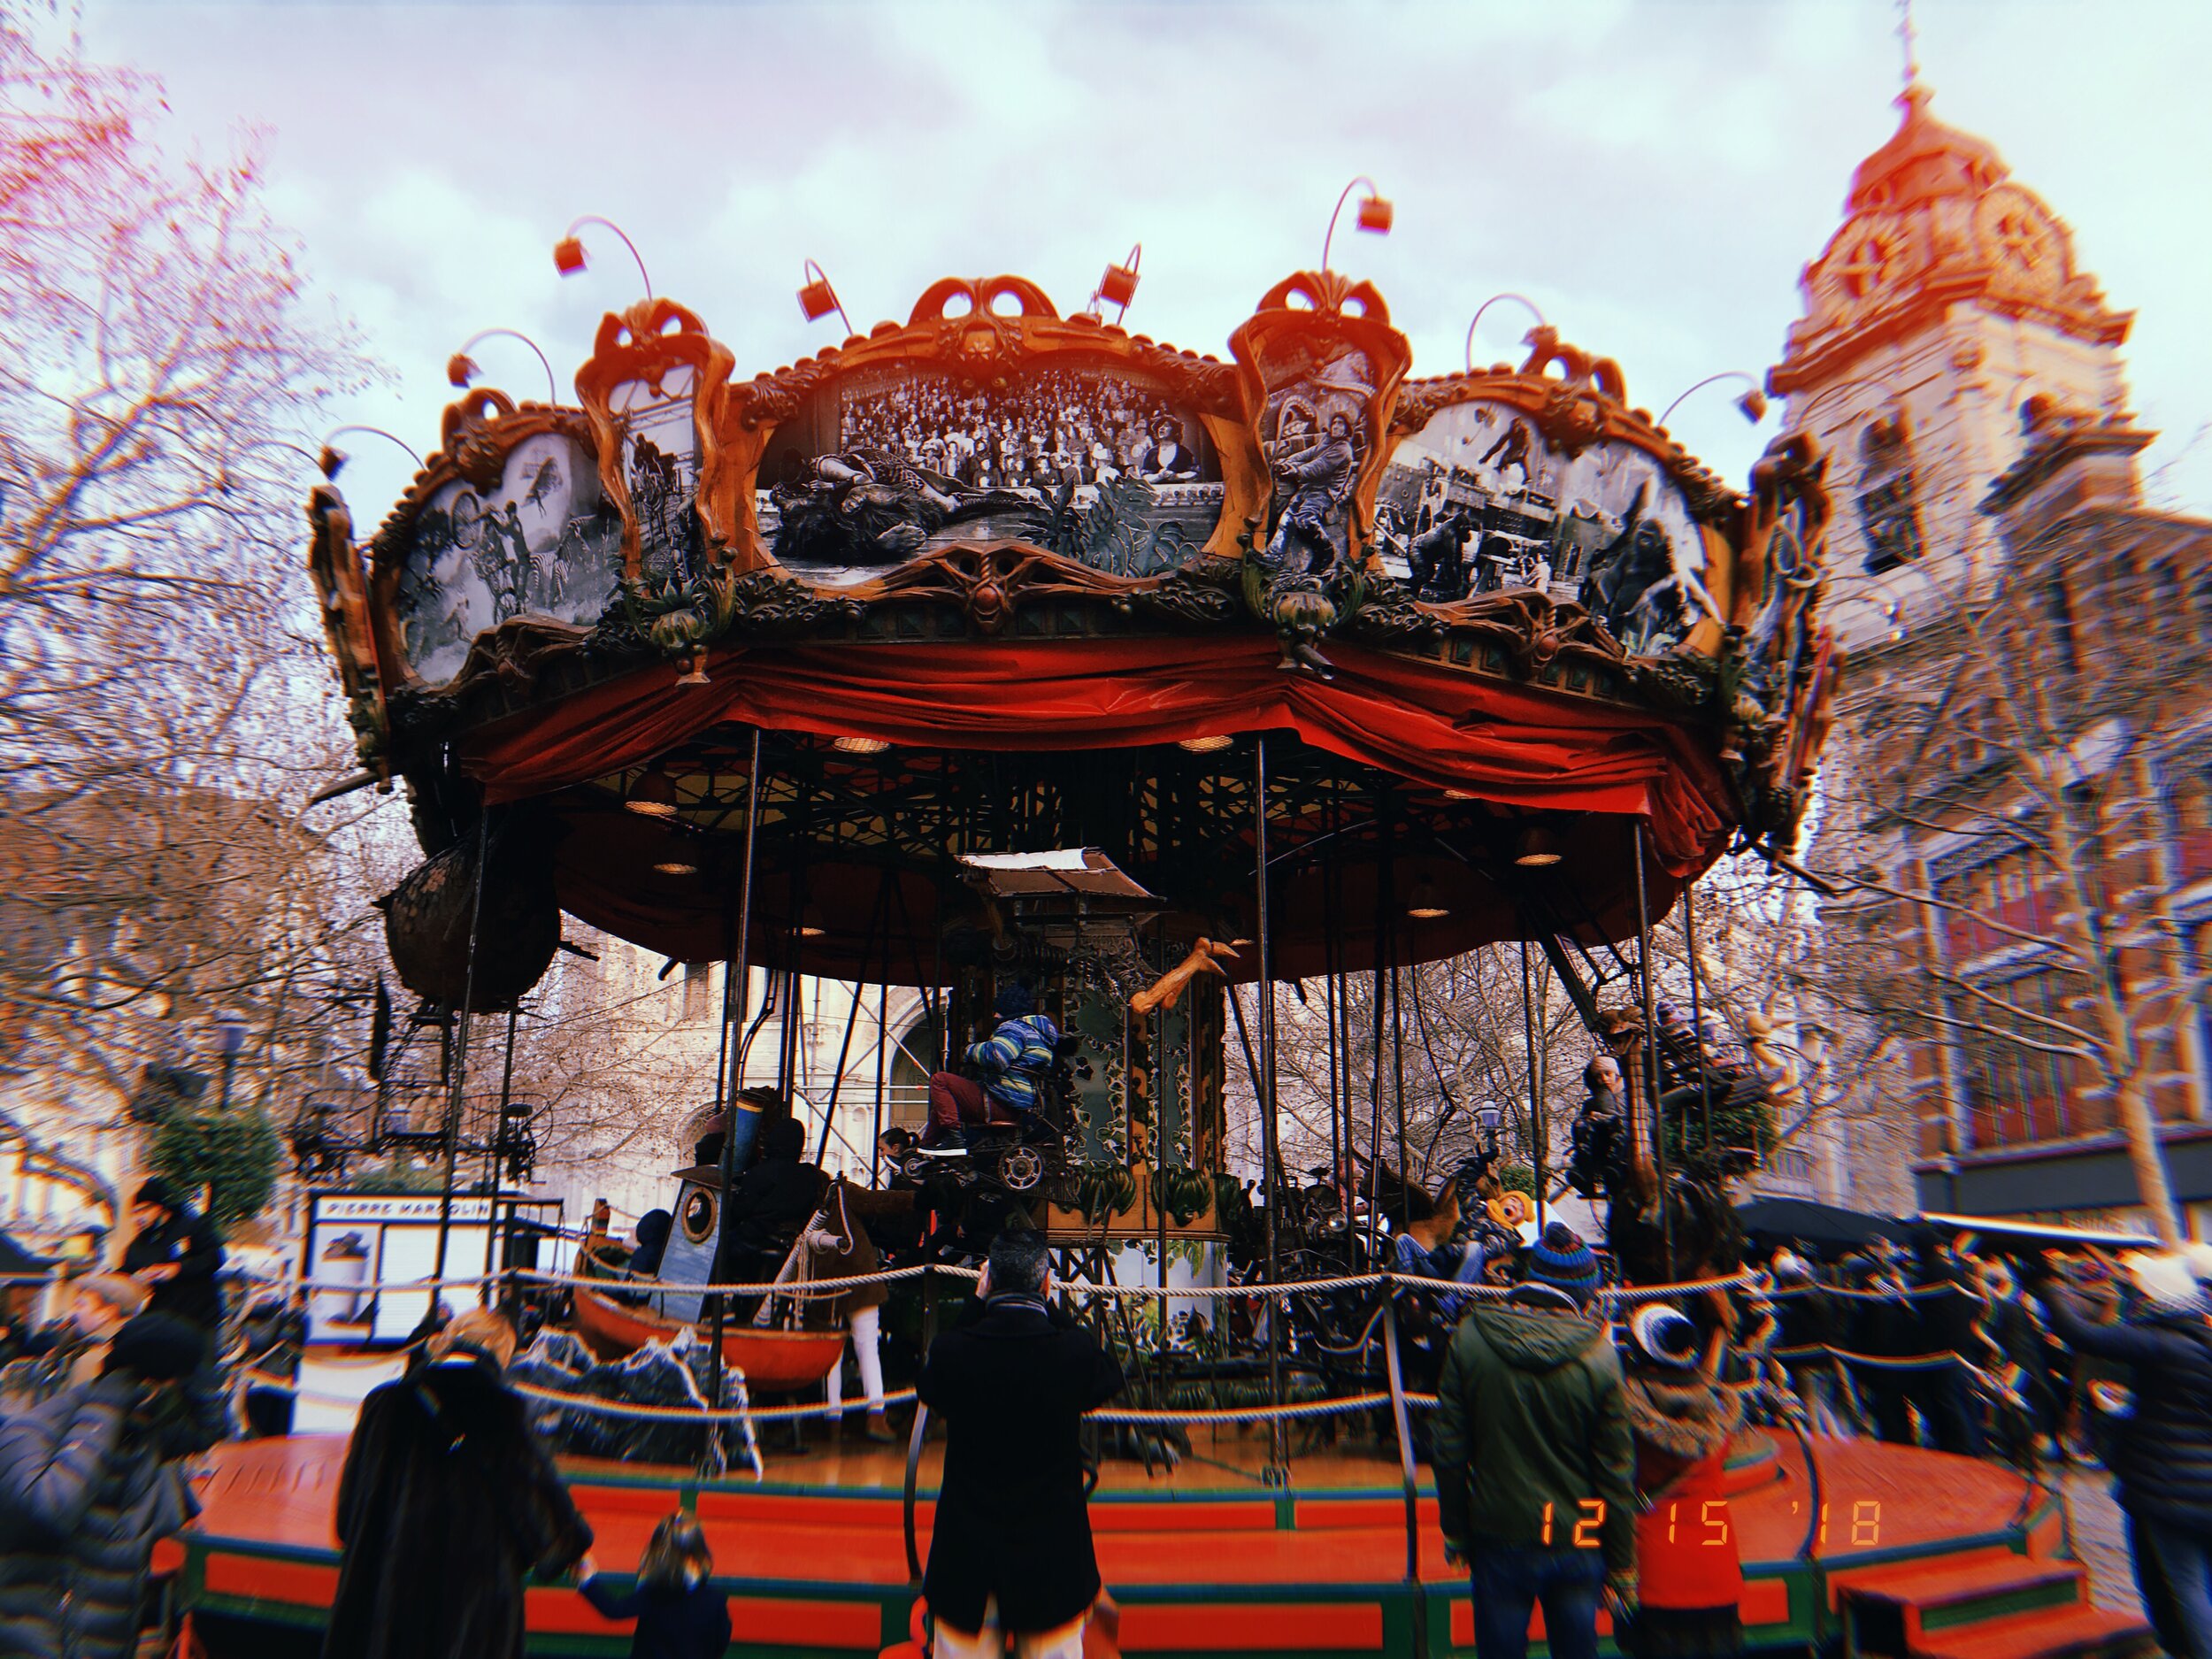 This steampunk style Carousel is truly a work of art and it is so unique amongst the others of Europe. 